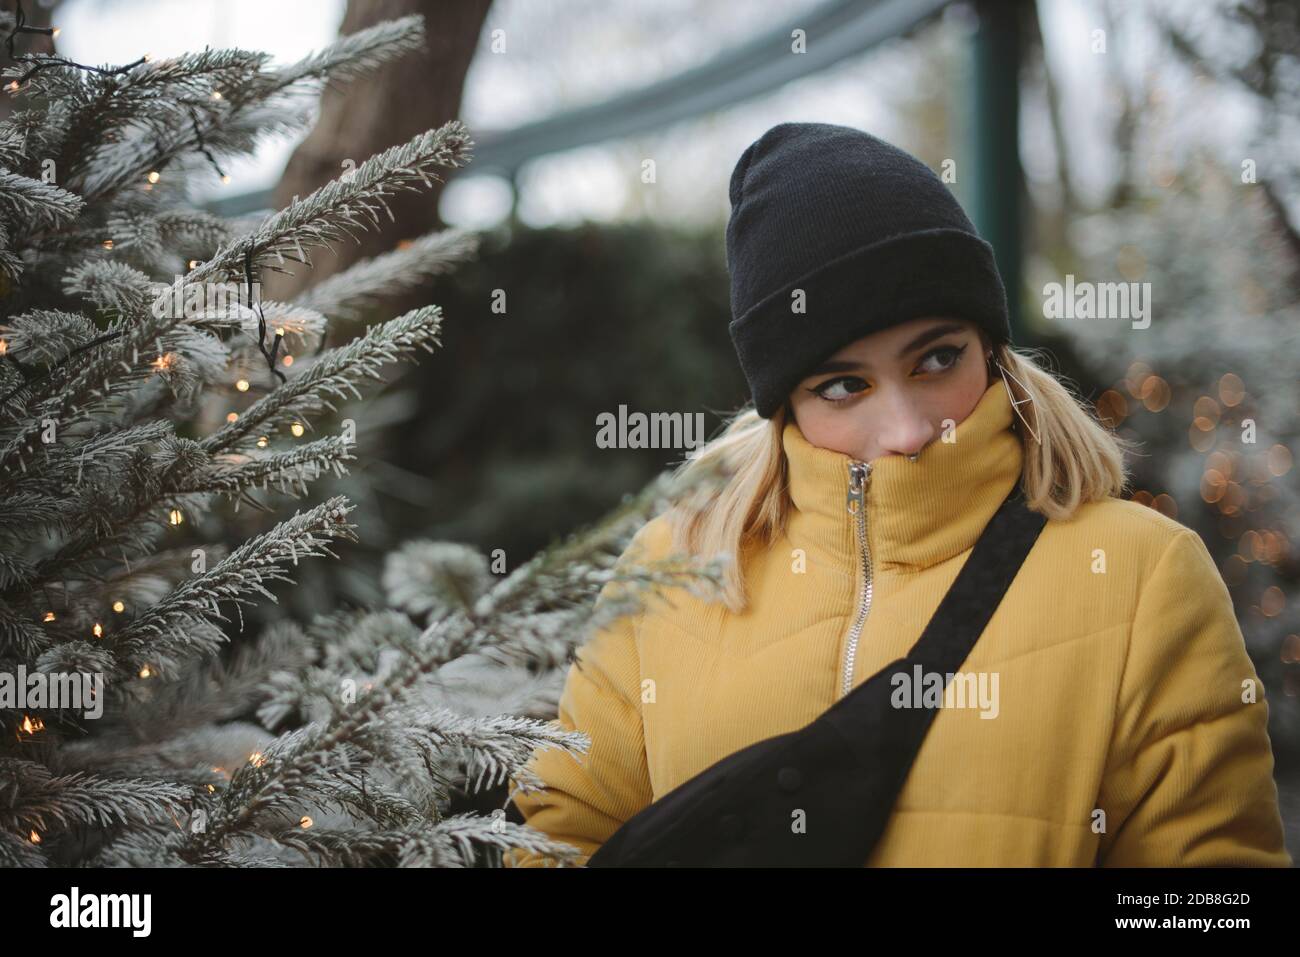 Portrait of a young woman in a puffer jacket standing by a Christmas tree, France Stock Photo